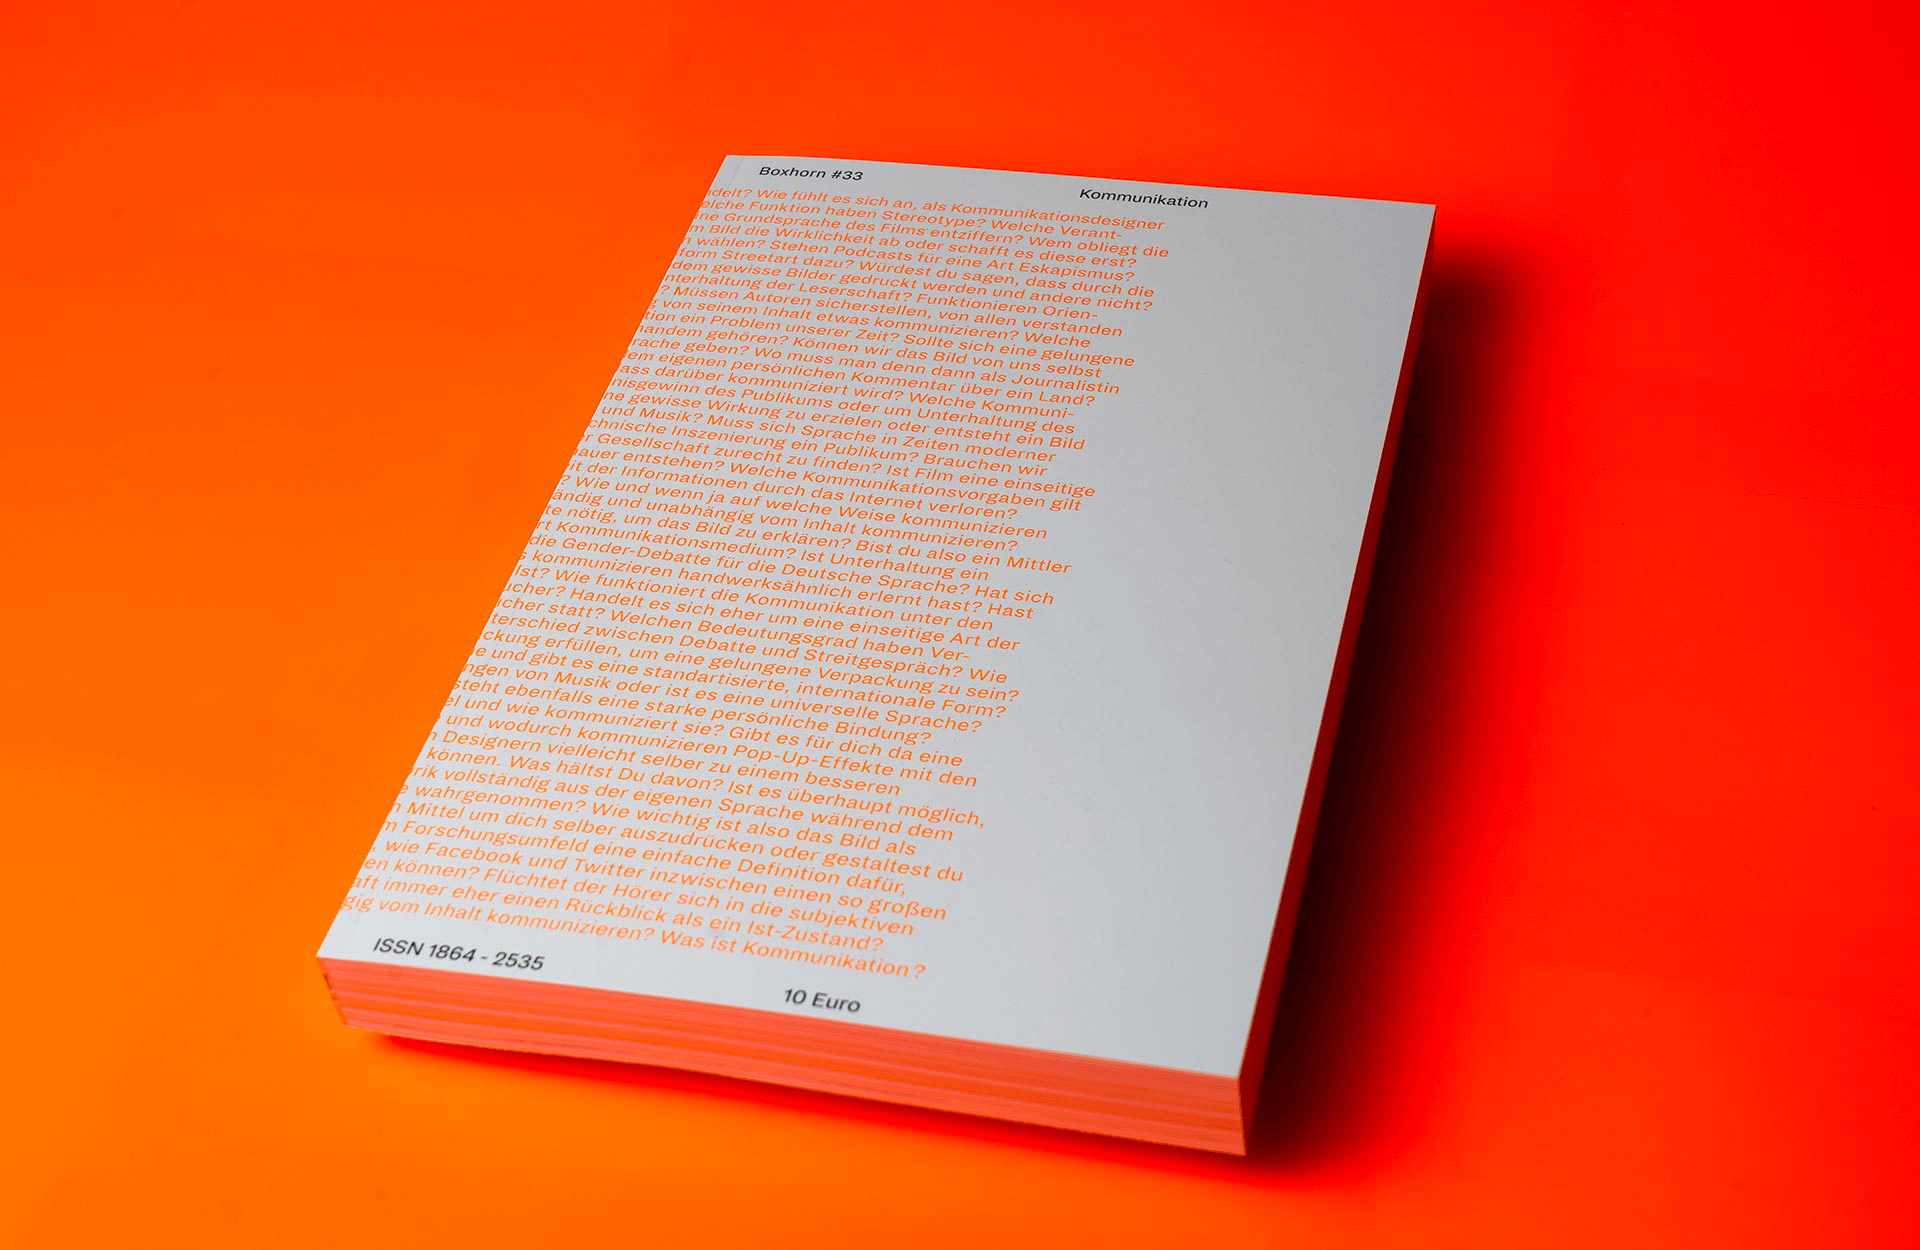 A white magazine in A4 size shown in perspective on a neon orange background.